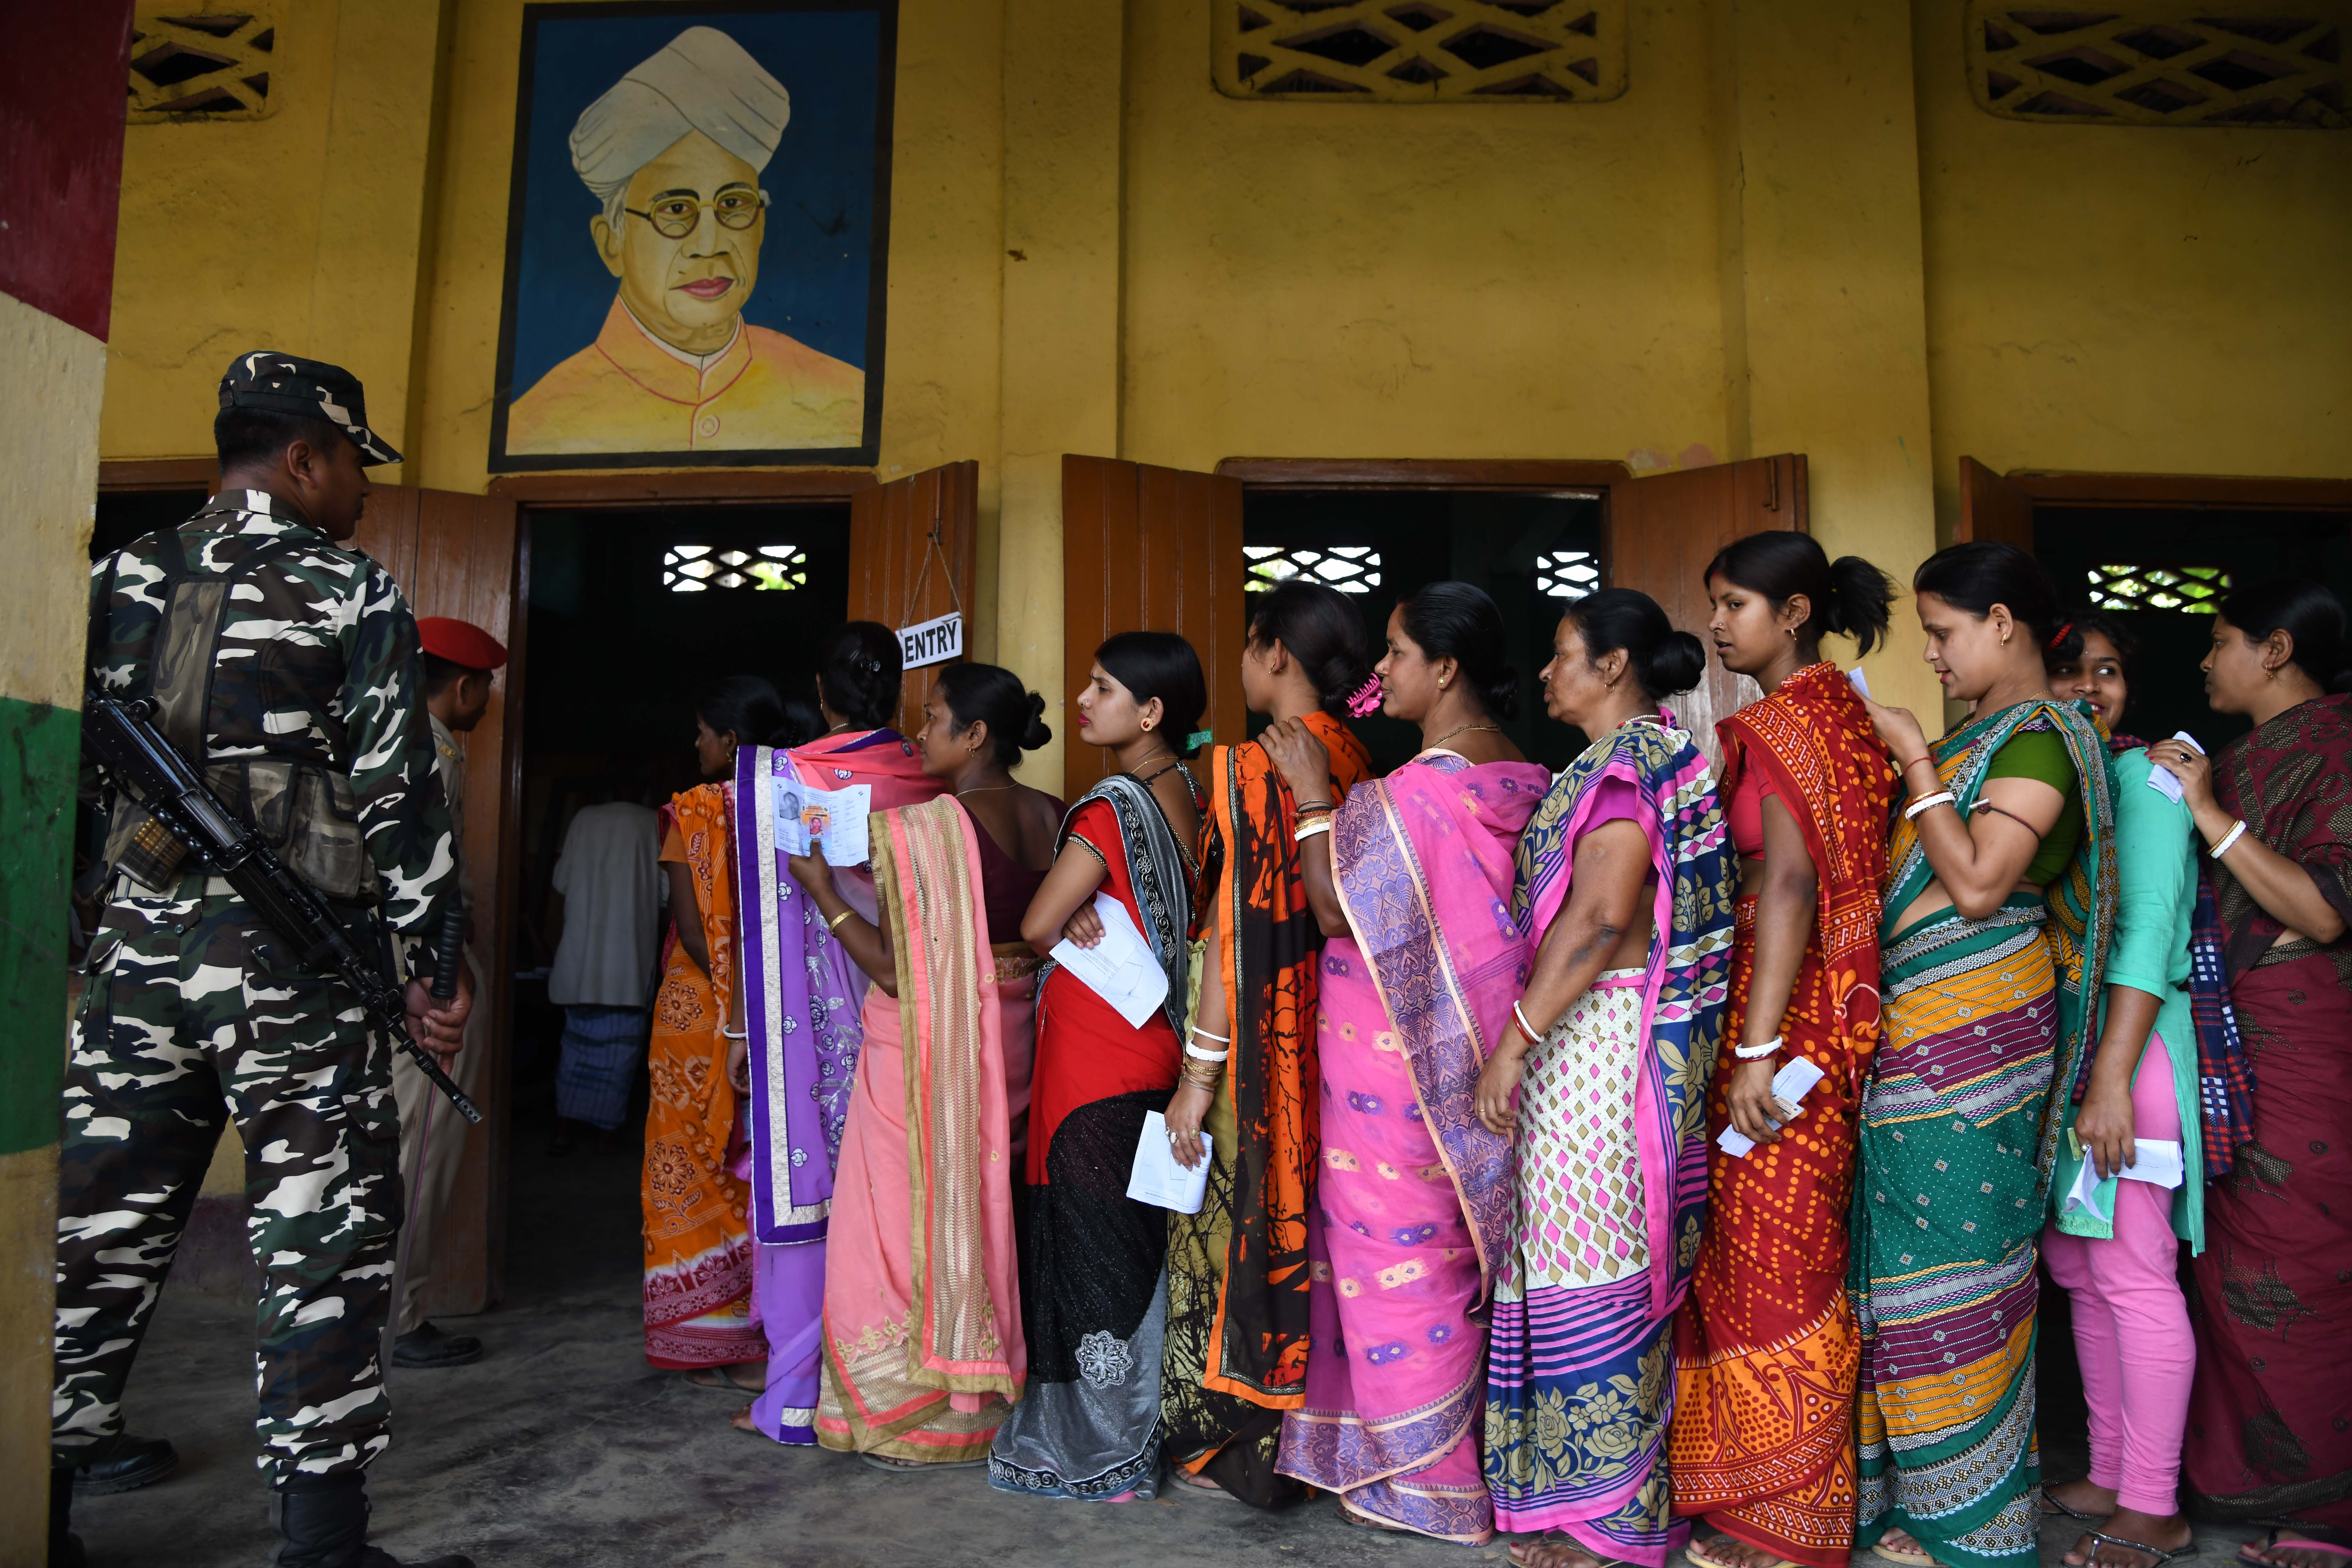  Indian voters queue to cast their votes at a polling station during India's general election in Amoni village, some 150 kms from Guwahati on April 11, 2019.